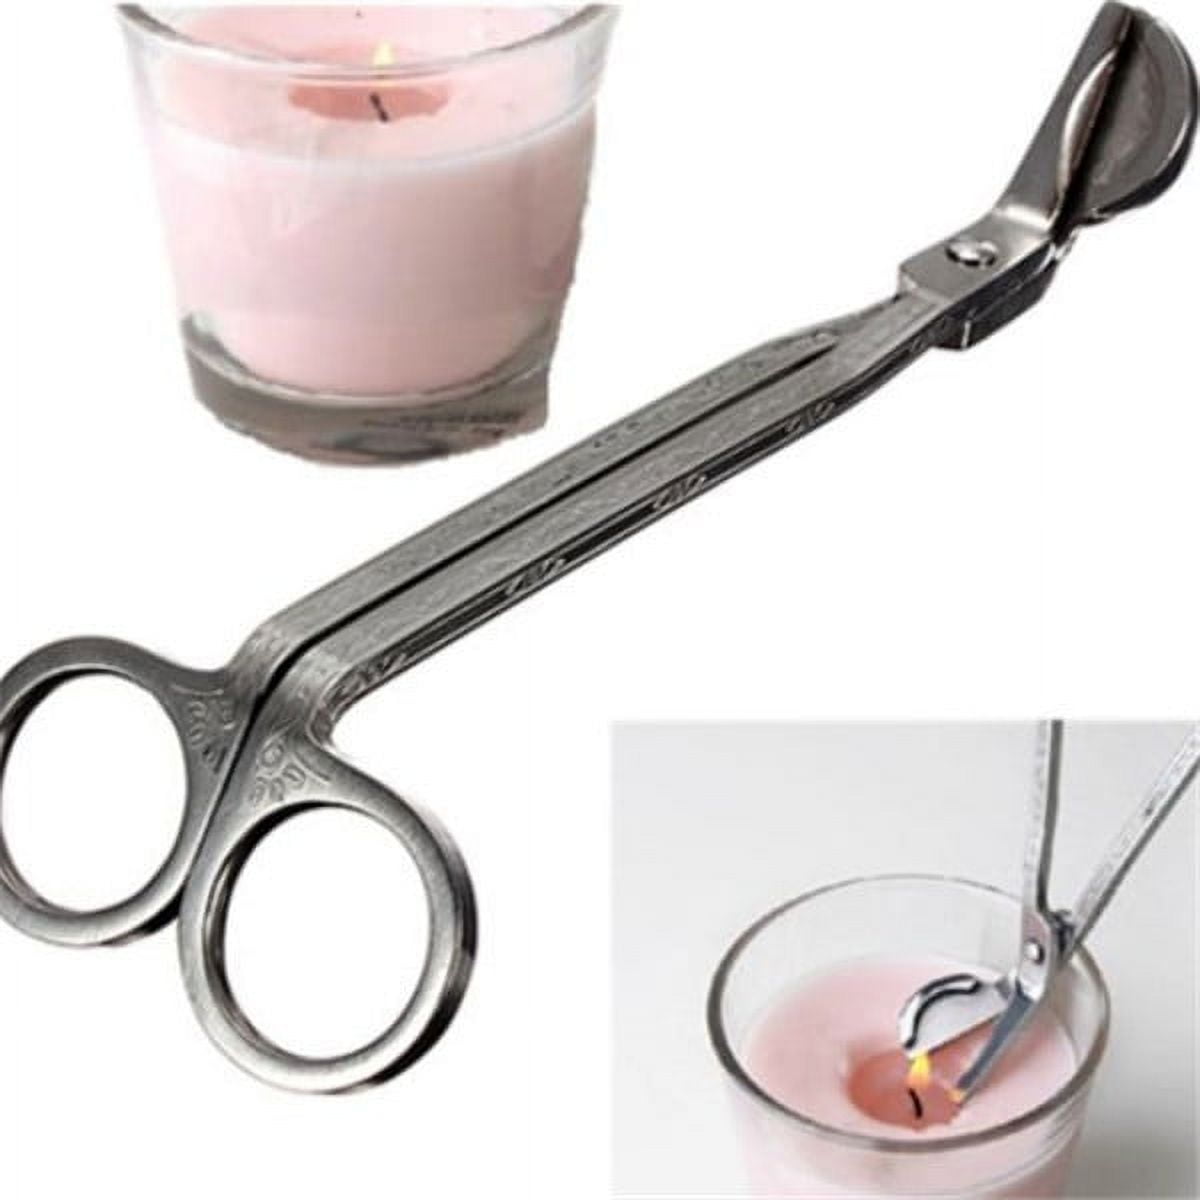 CleanCut Wick Trimmer – Wax Candle Company